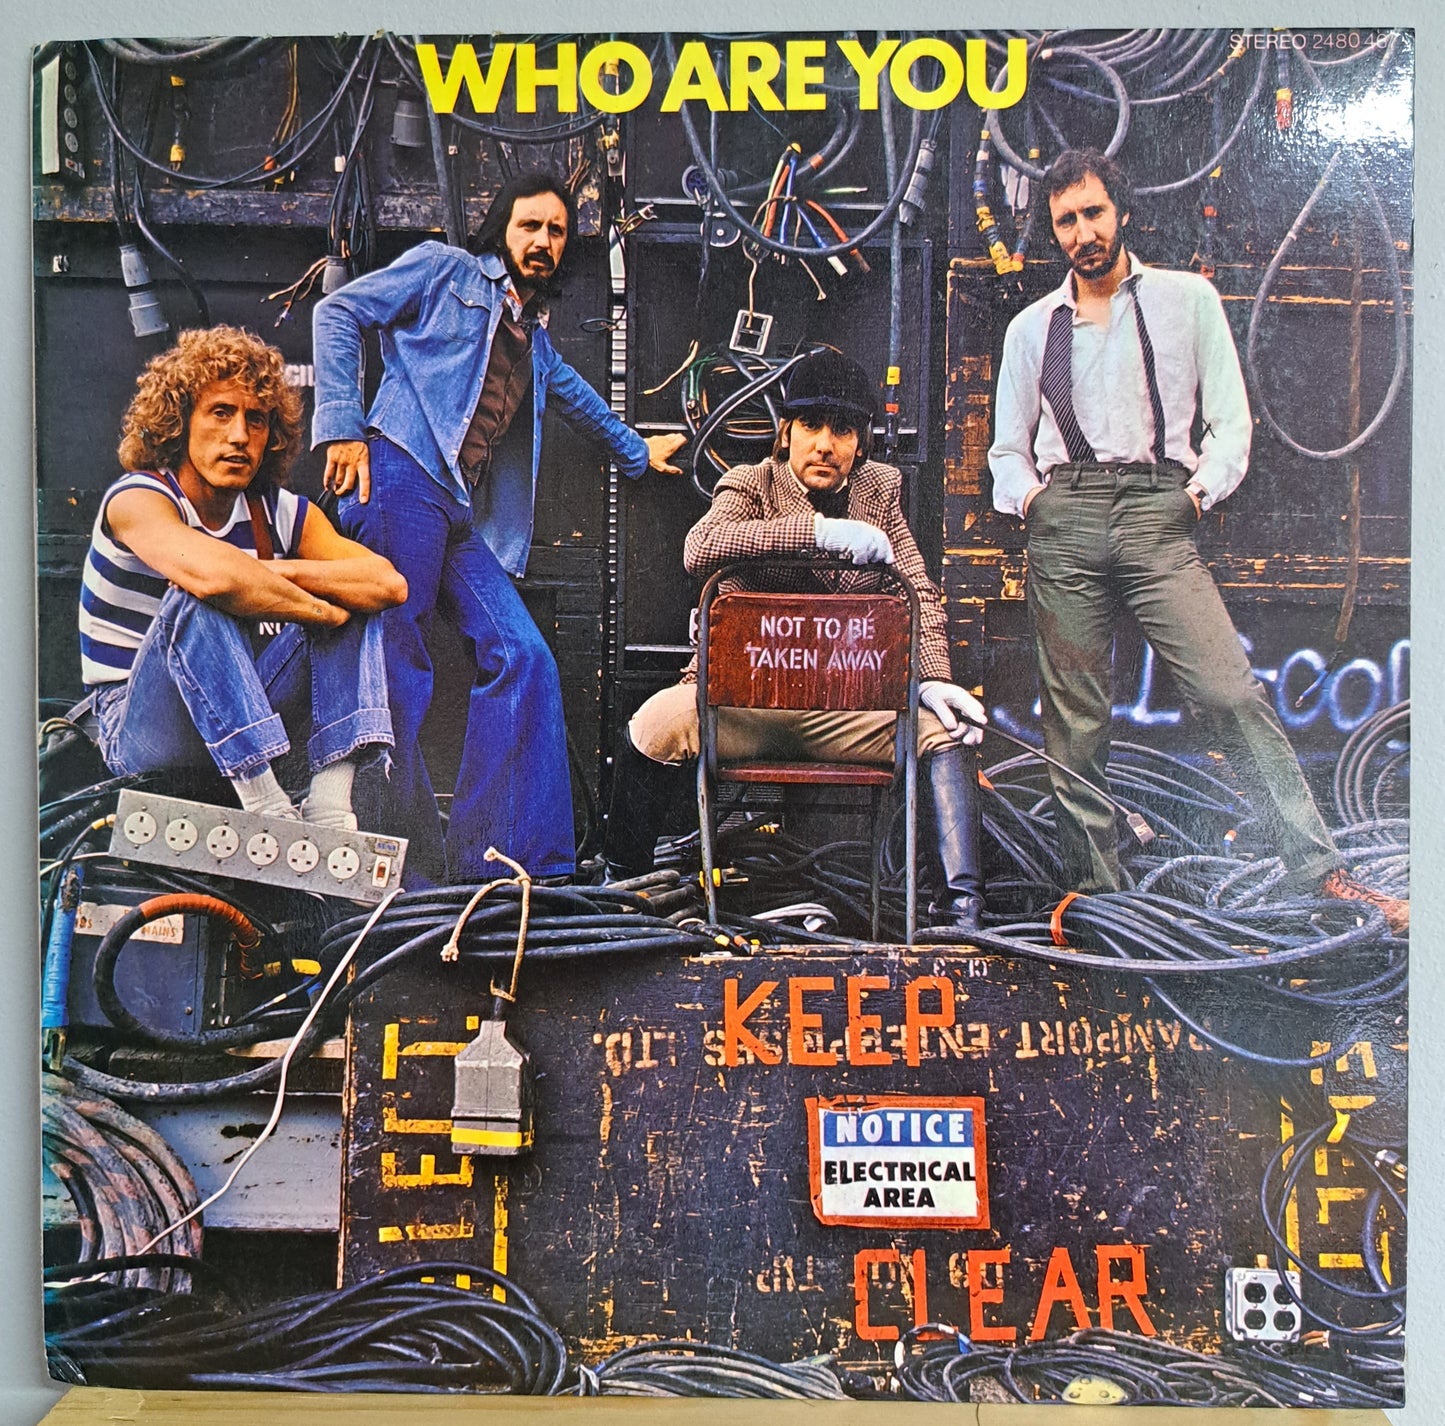 The Who - Who are you